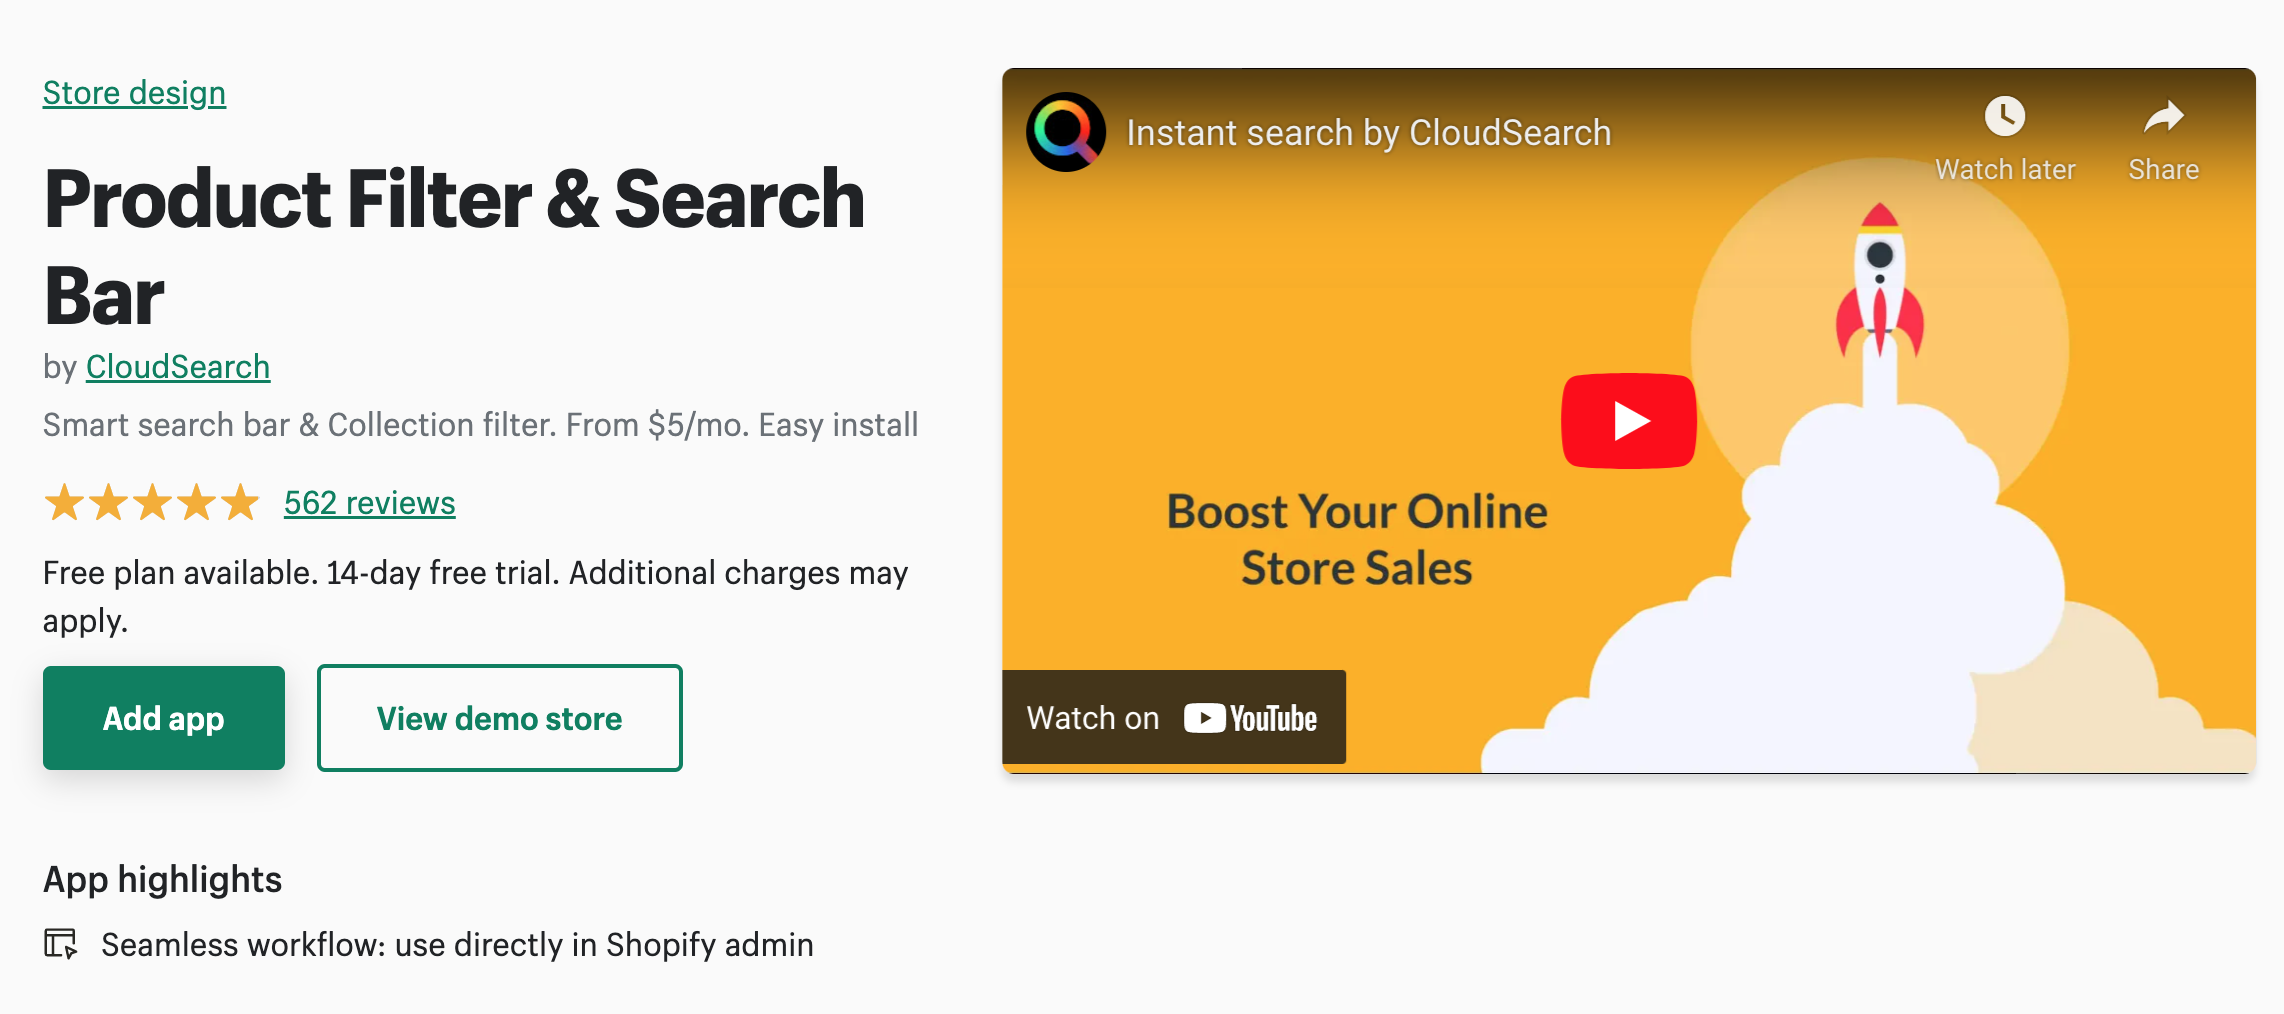 Product Filter & Search Bar by CloudSearch